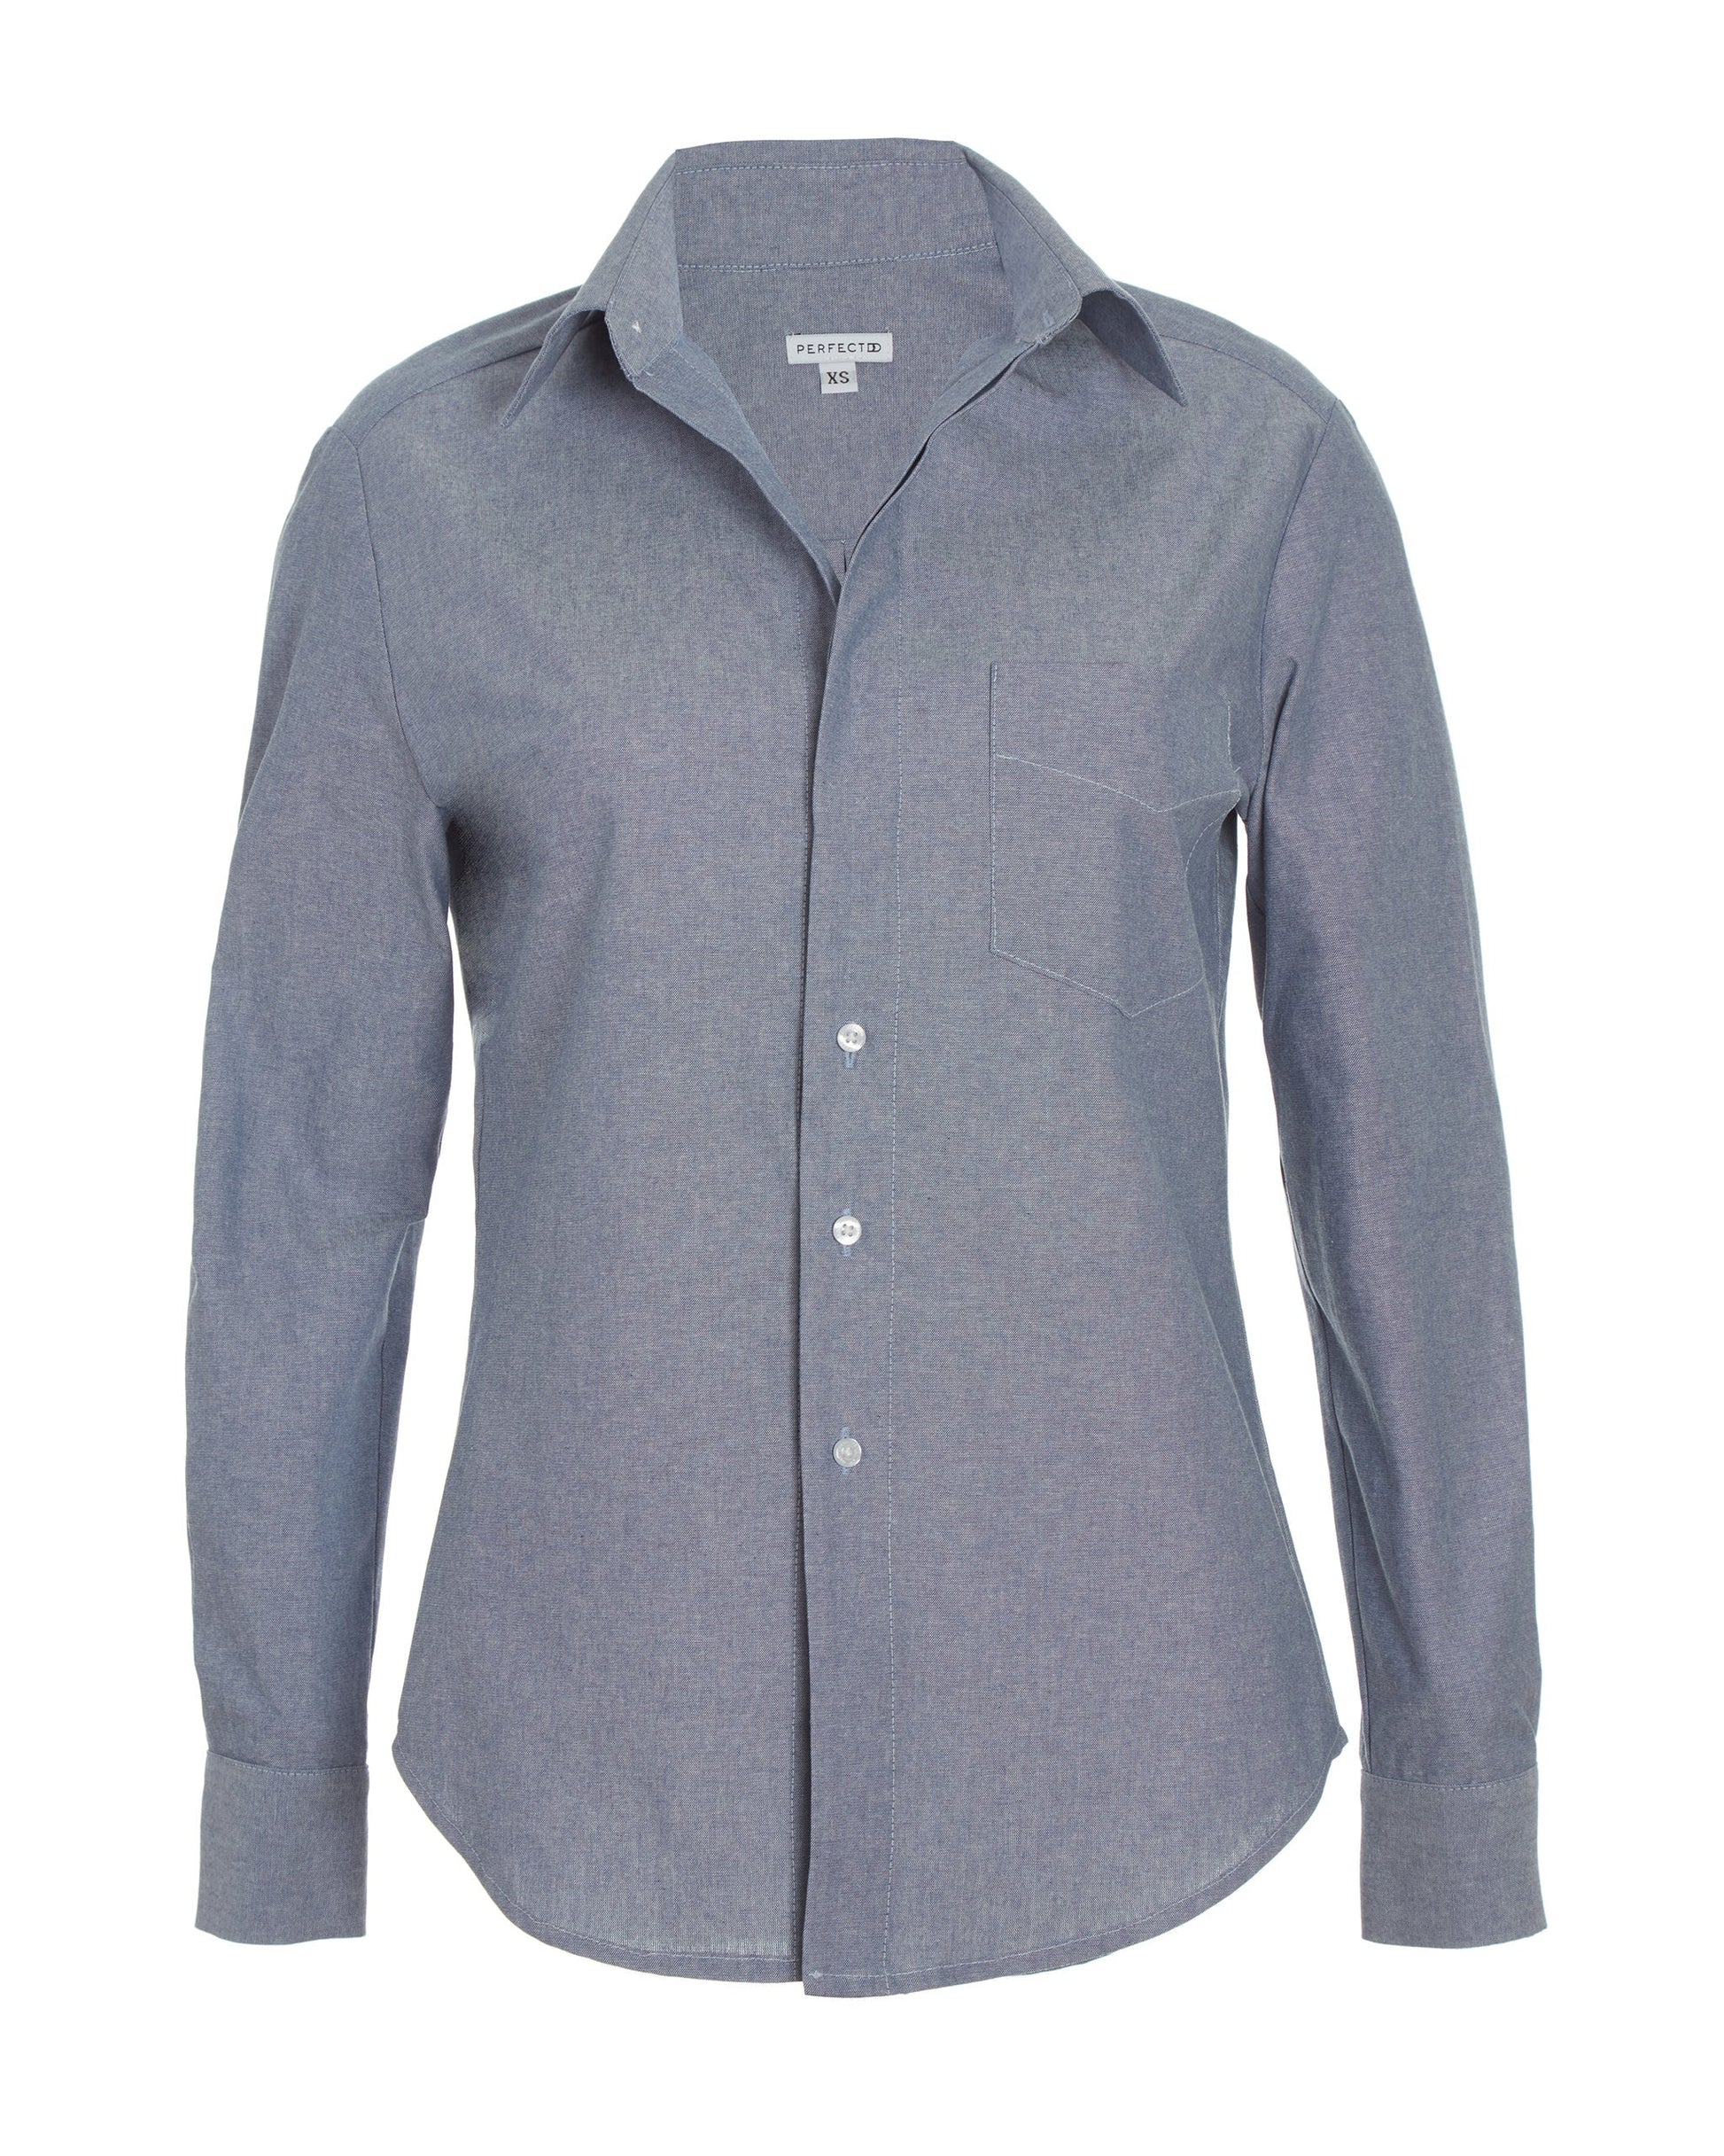 Front flat lay of chambray cotton long sleeve classic button down